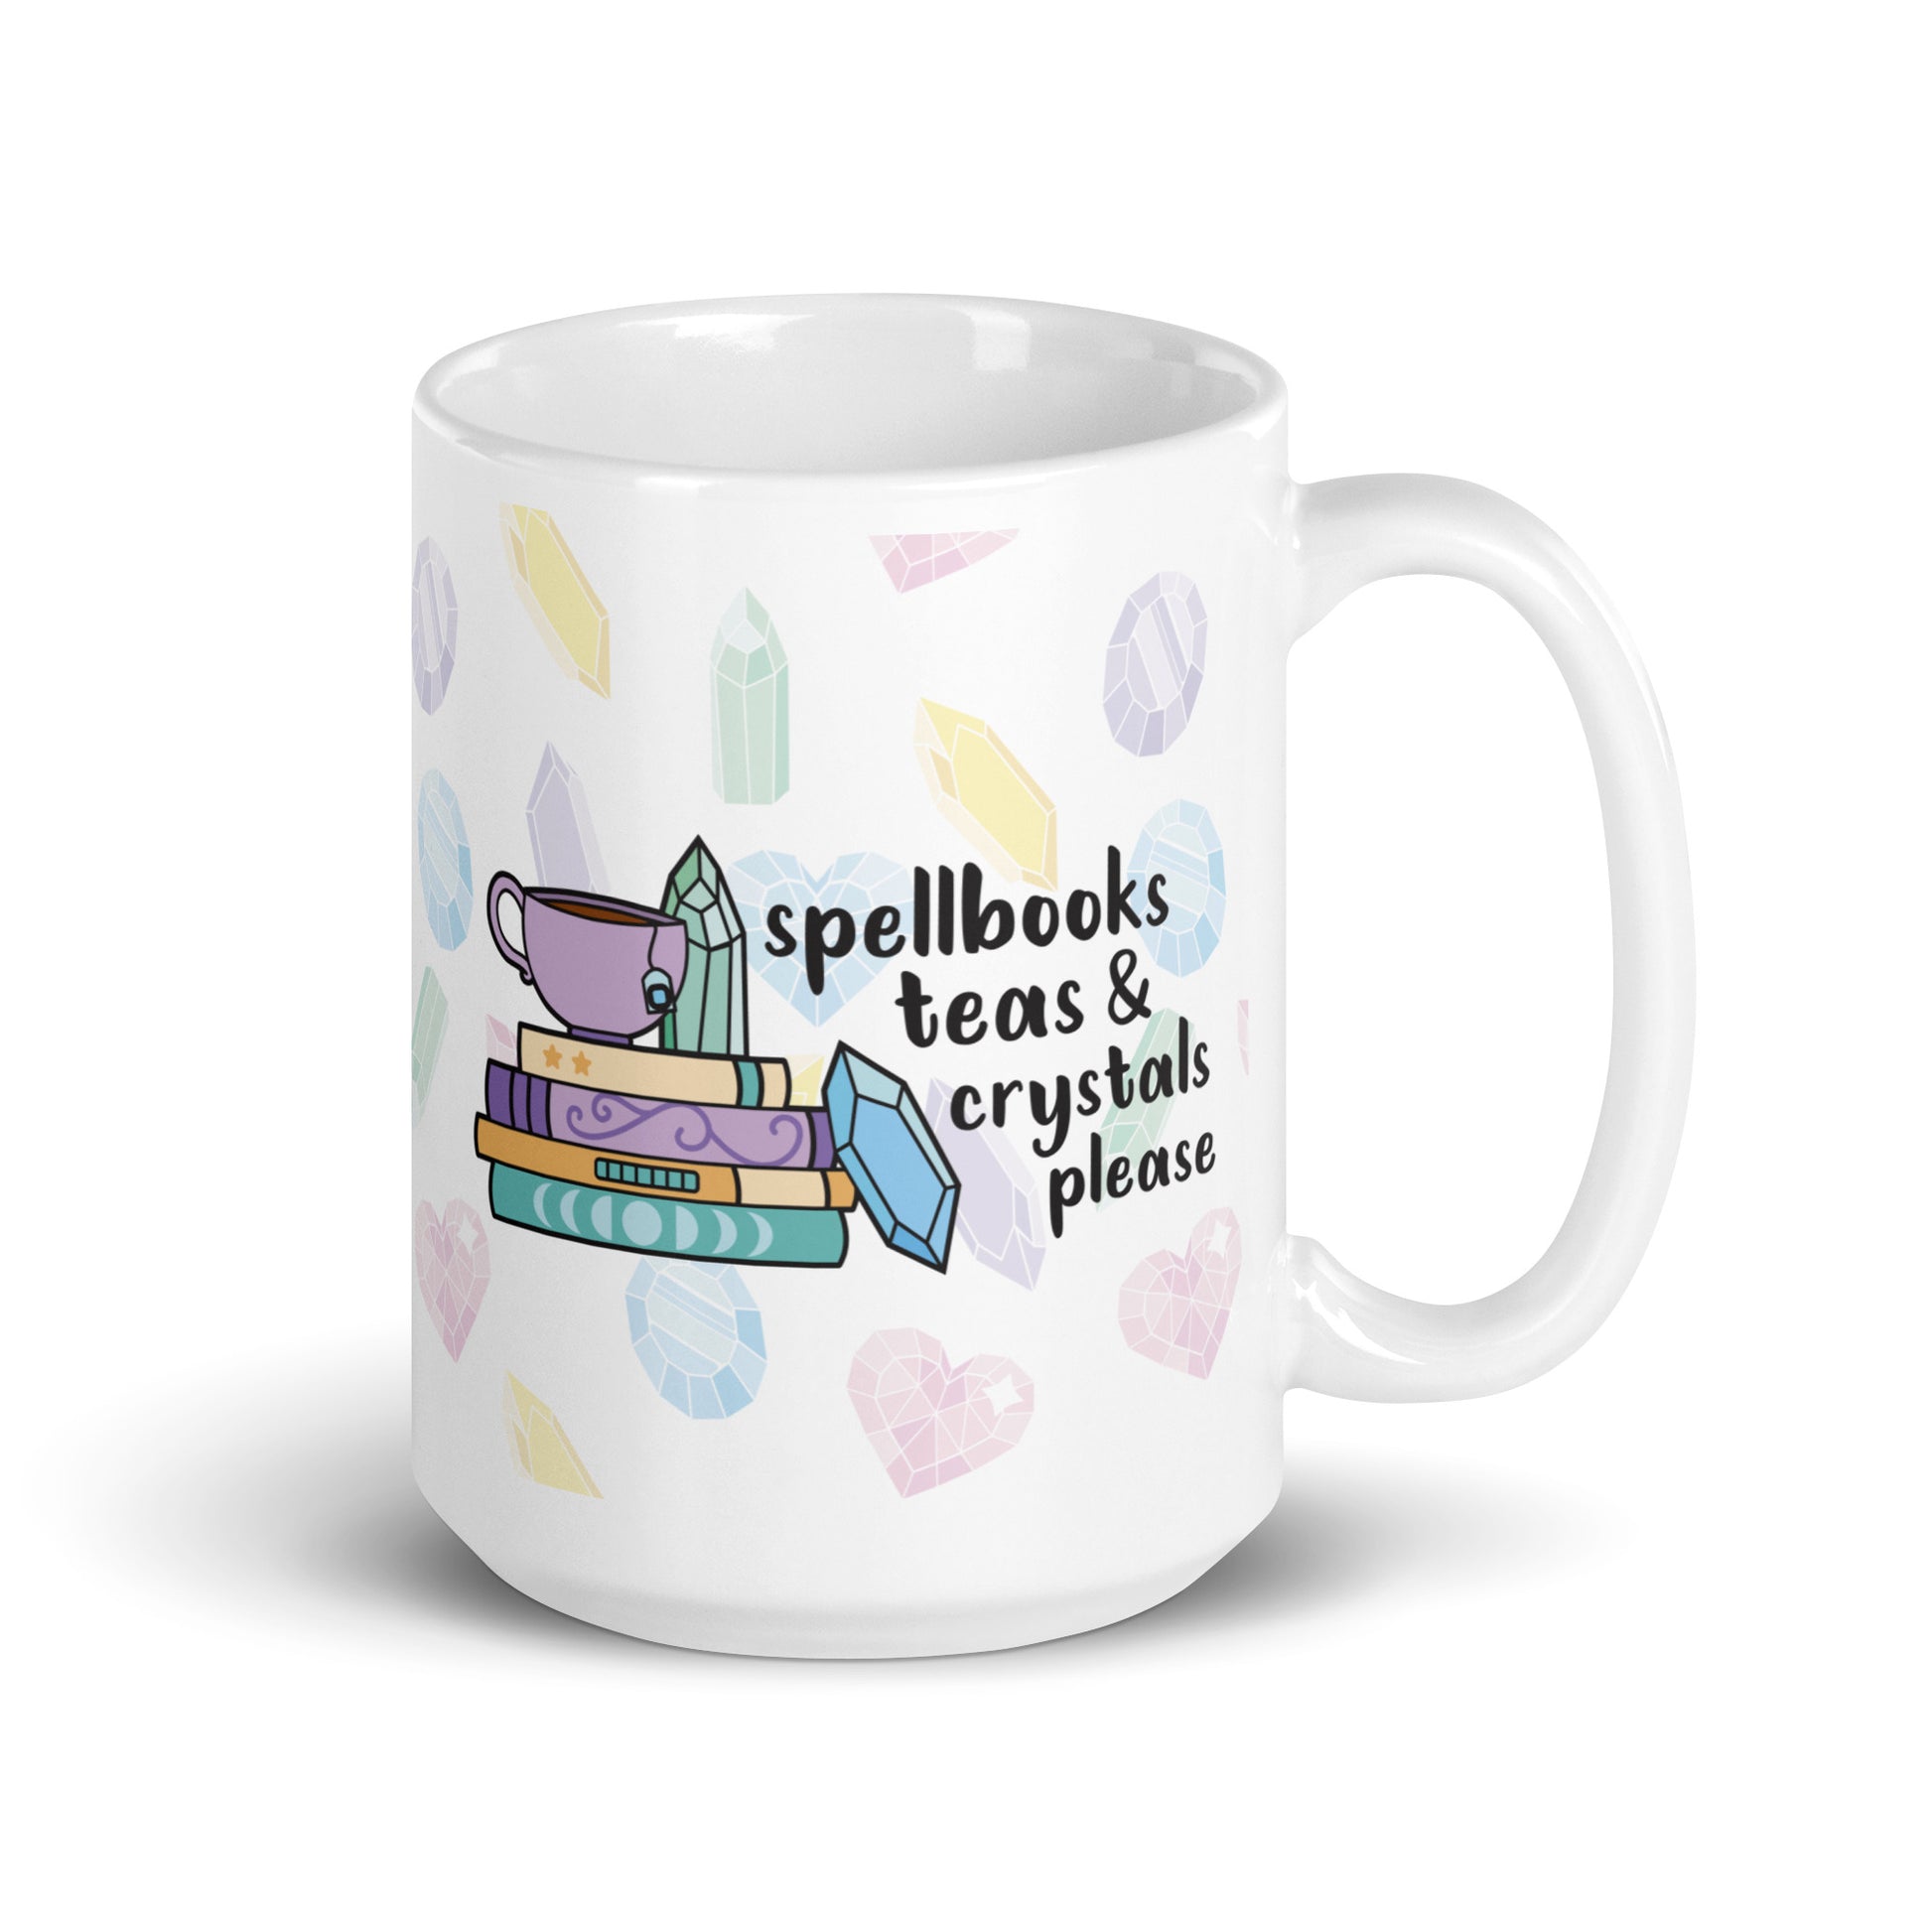 A white 15 ounce ceramic mug with a pattern of pastel crystals. In the center of the mug is an illustration of several books and crystals and a teacup. Text along side the image reads "Spellbooks, teas, & crystals please"